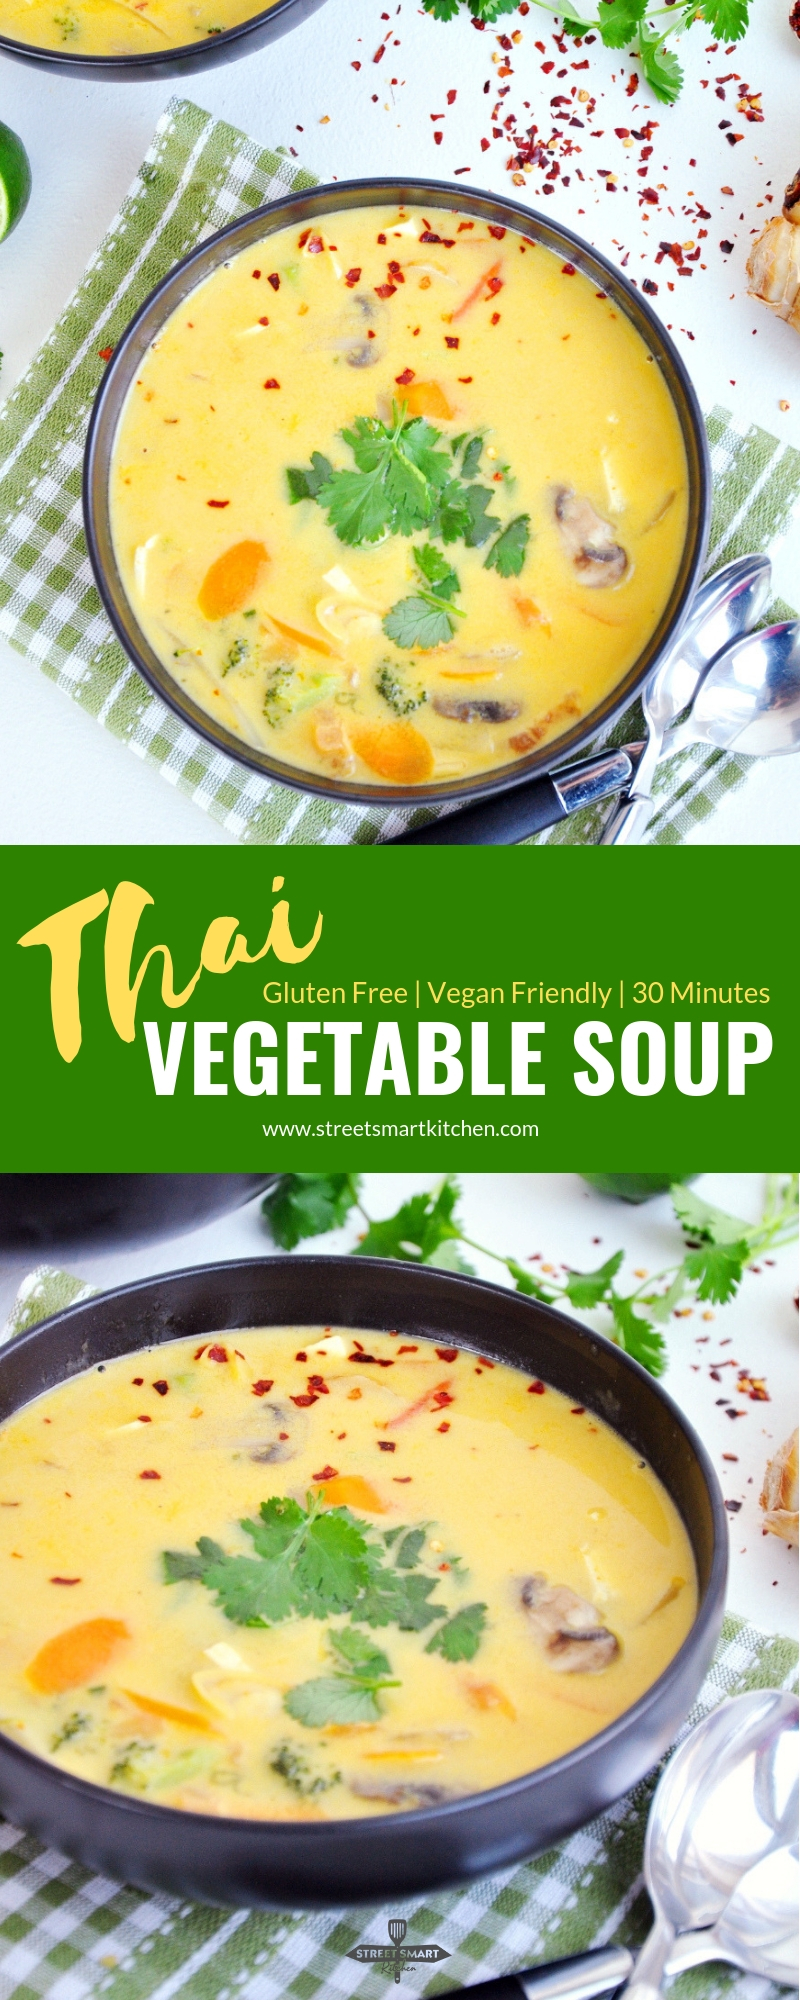 A light Thai vegetable soup recipe, flavored with authentic herbs along with hearty vegetables, coconut milk, and tofu. It's vegan and gluten-free friendly.